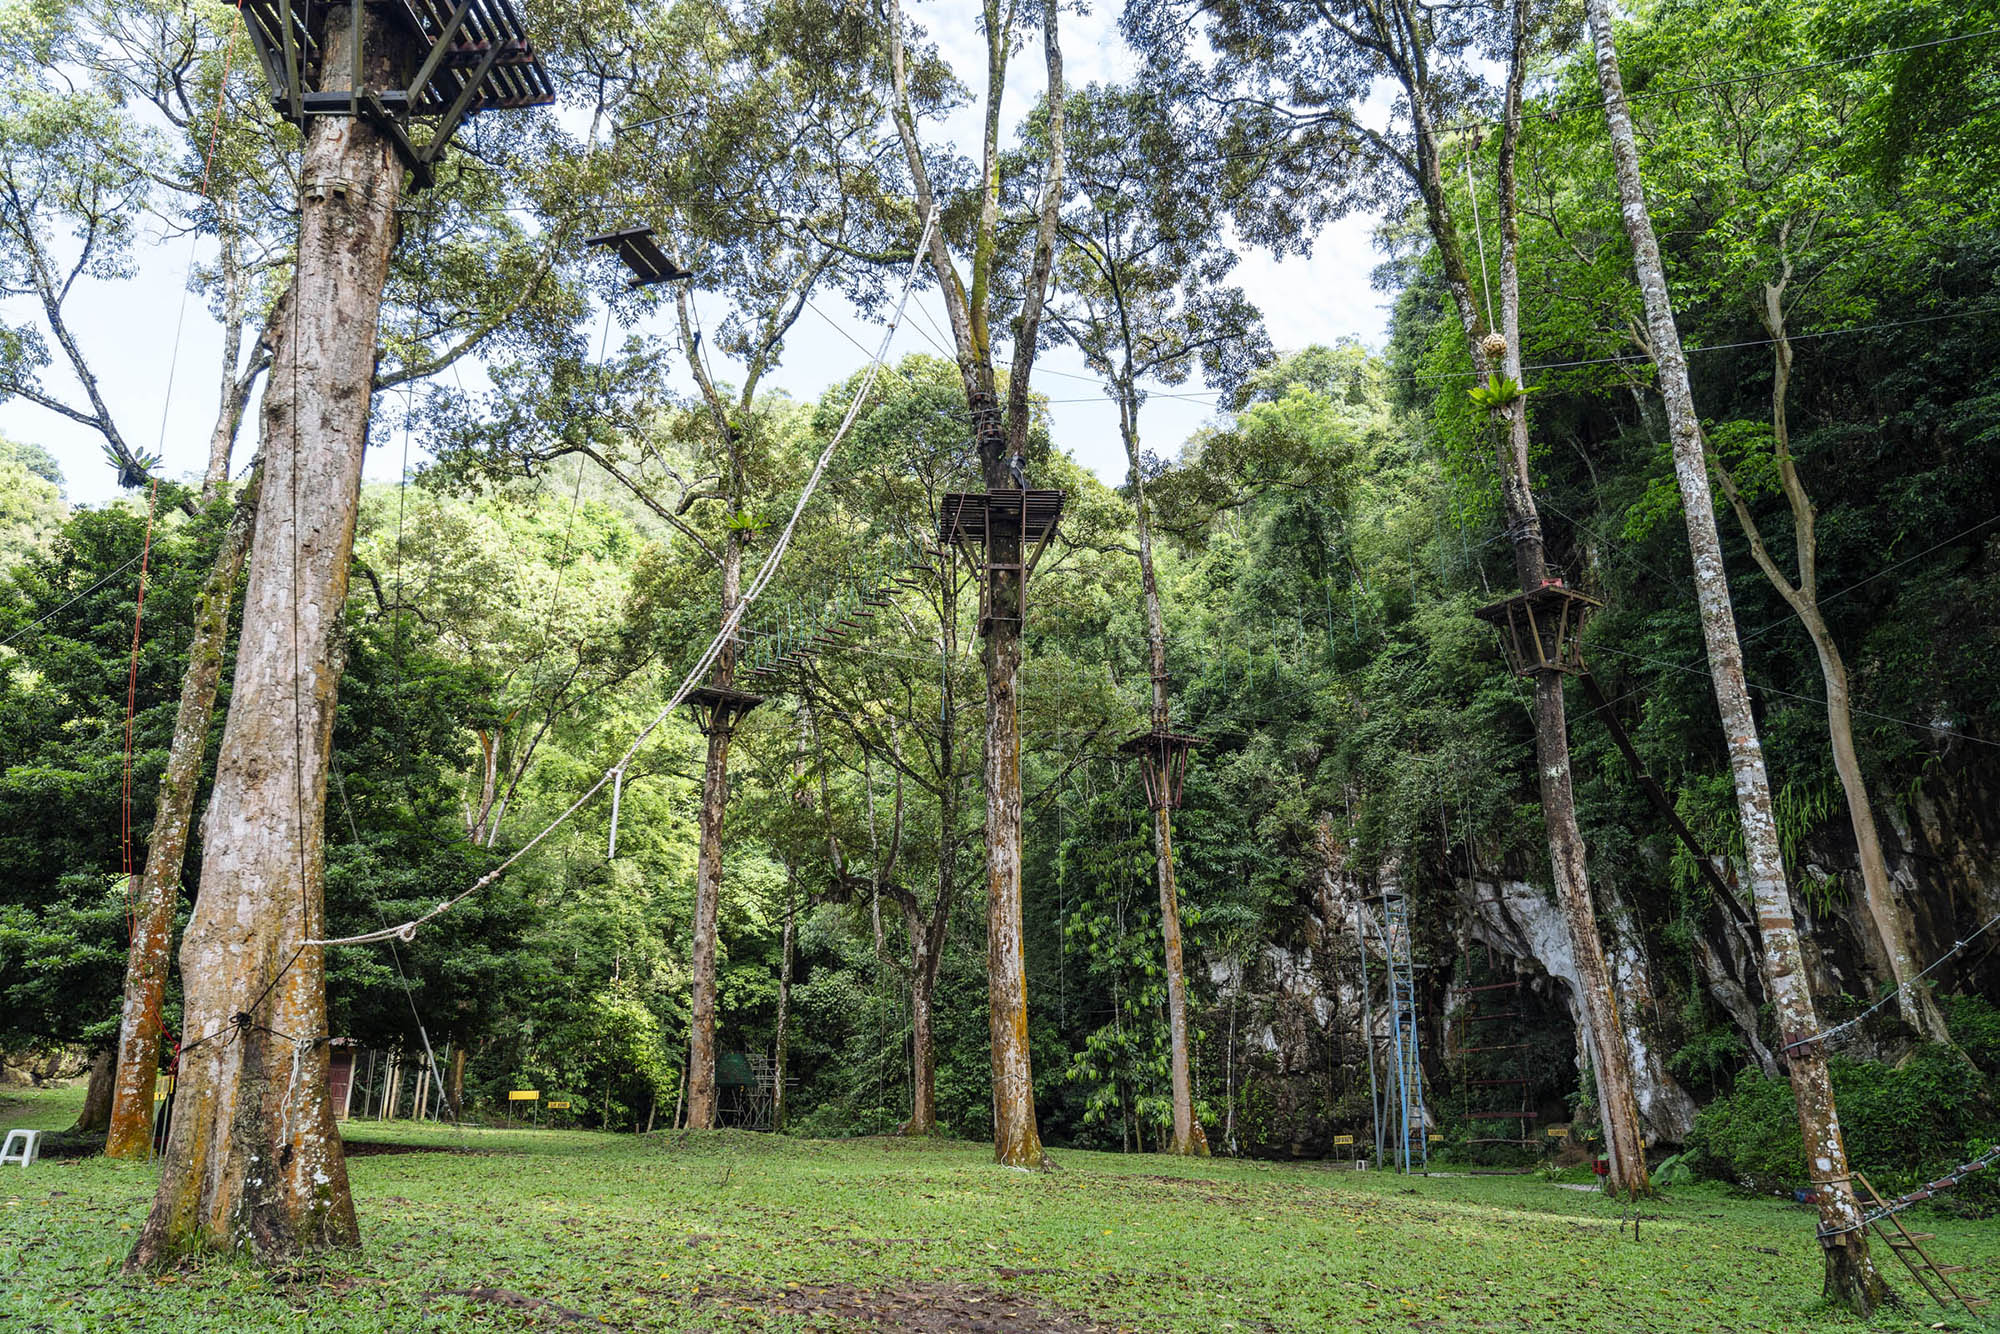 Durian trees at Nomad Adventure’s Mountain School are used for the outdoor learning courses. Photo by Teoh Eng Hooi.